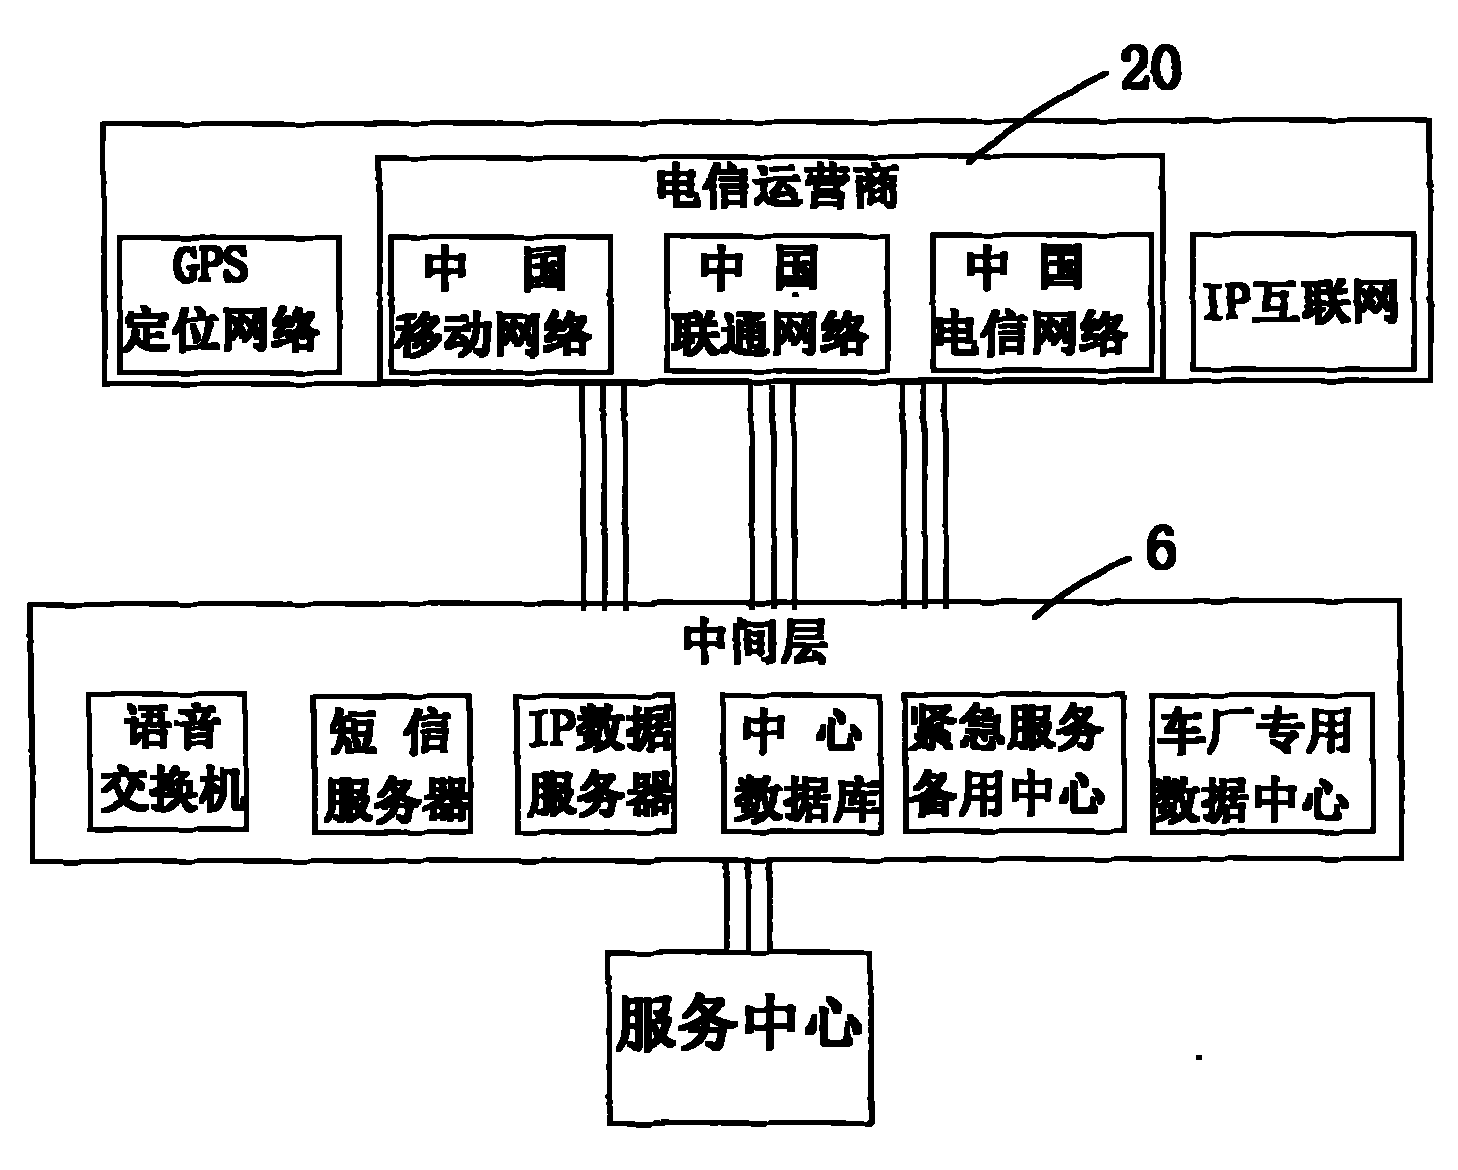 System and method for stagnation storage protection of attribution service access address